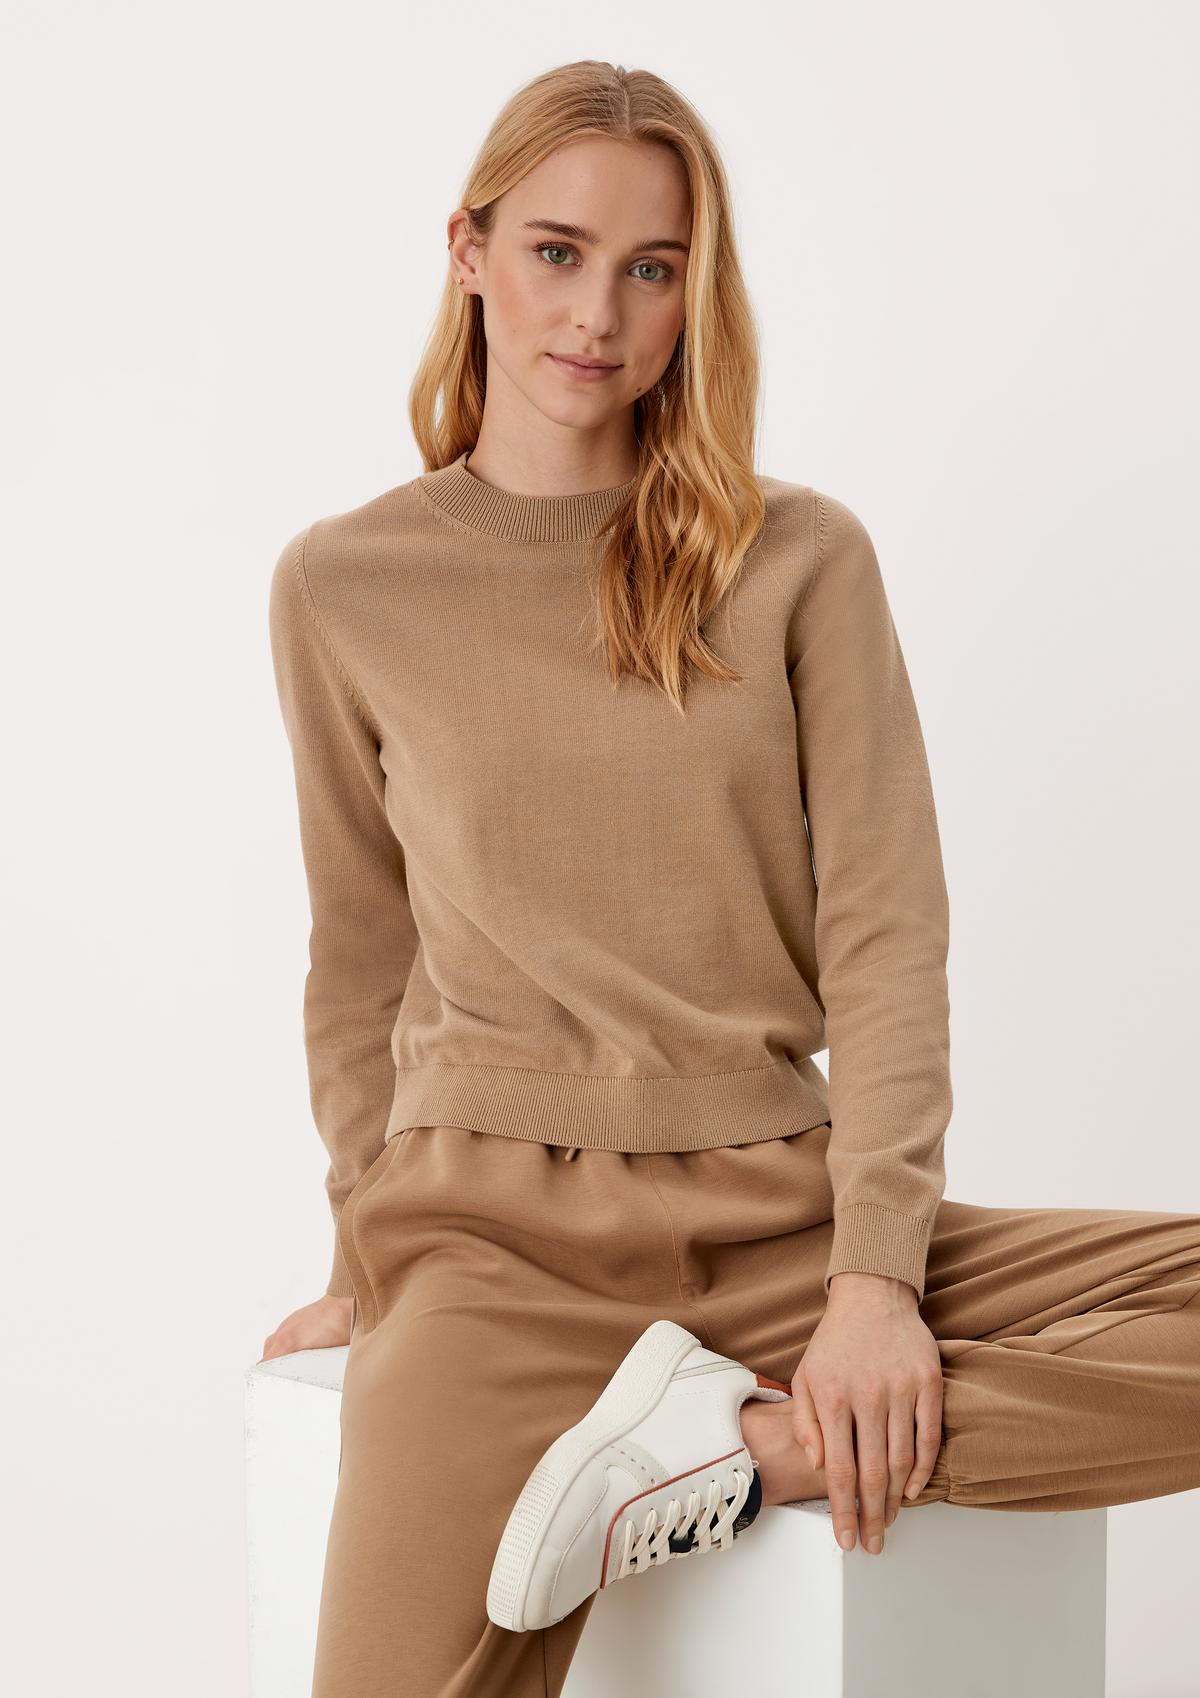 s.Oliver Cotton jumper with rib knit cuffs, collar and hem